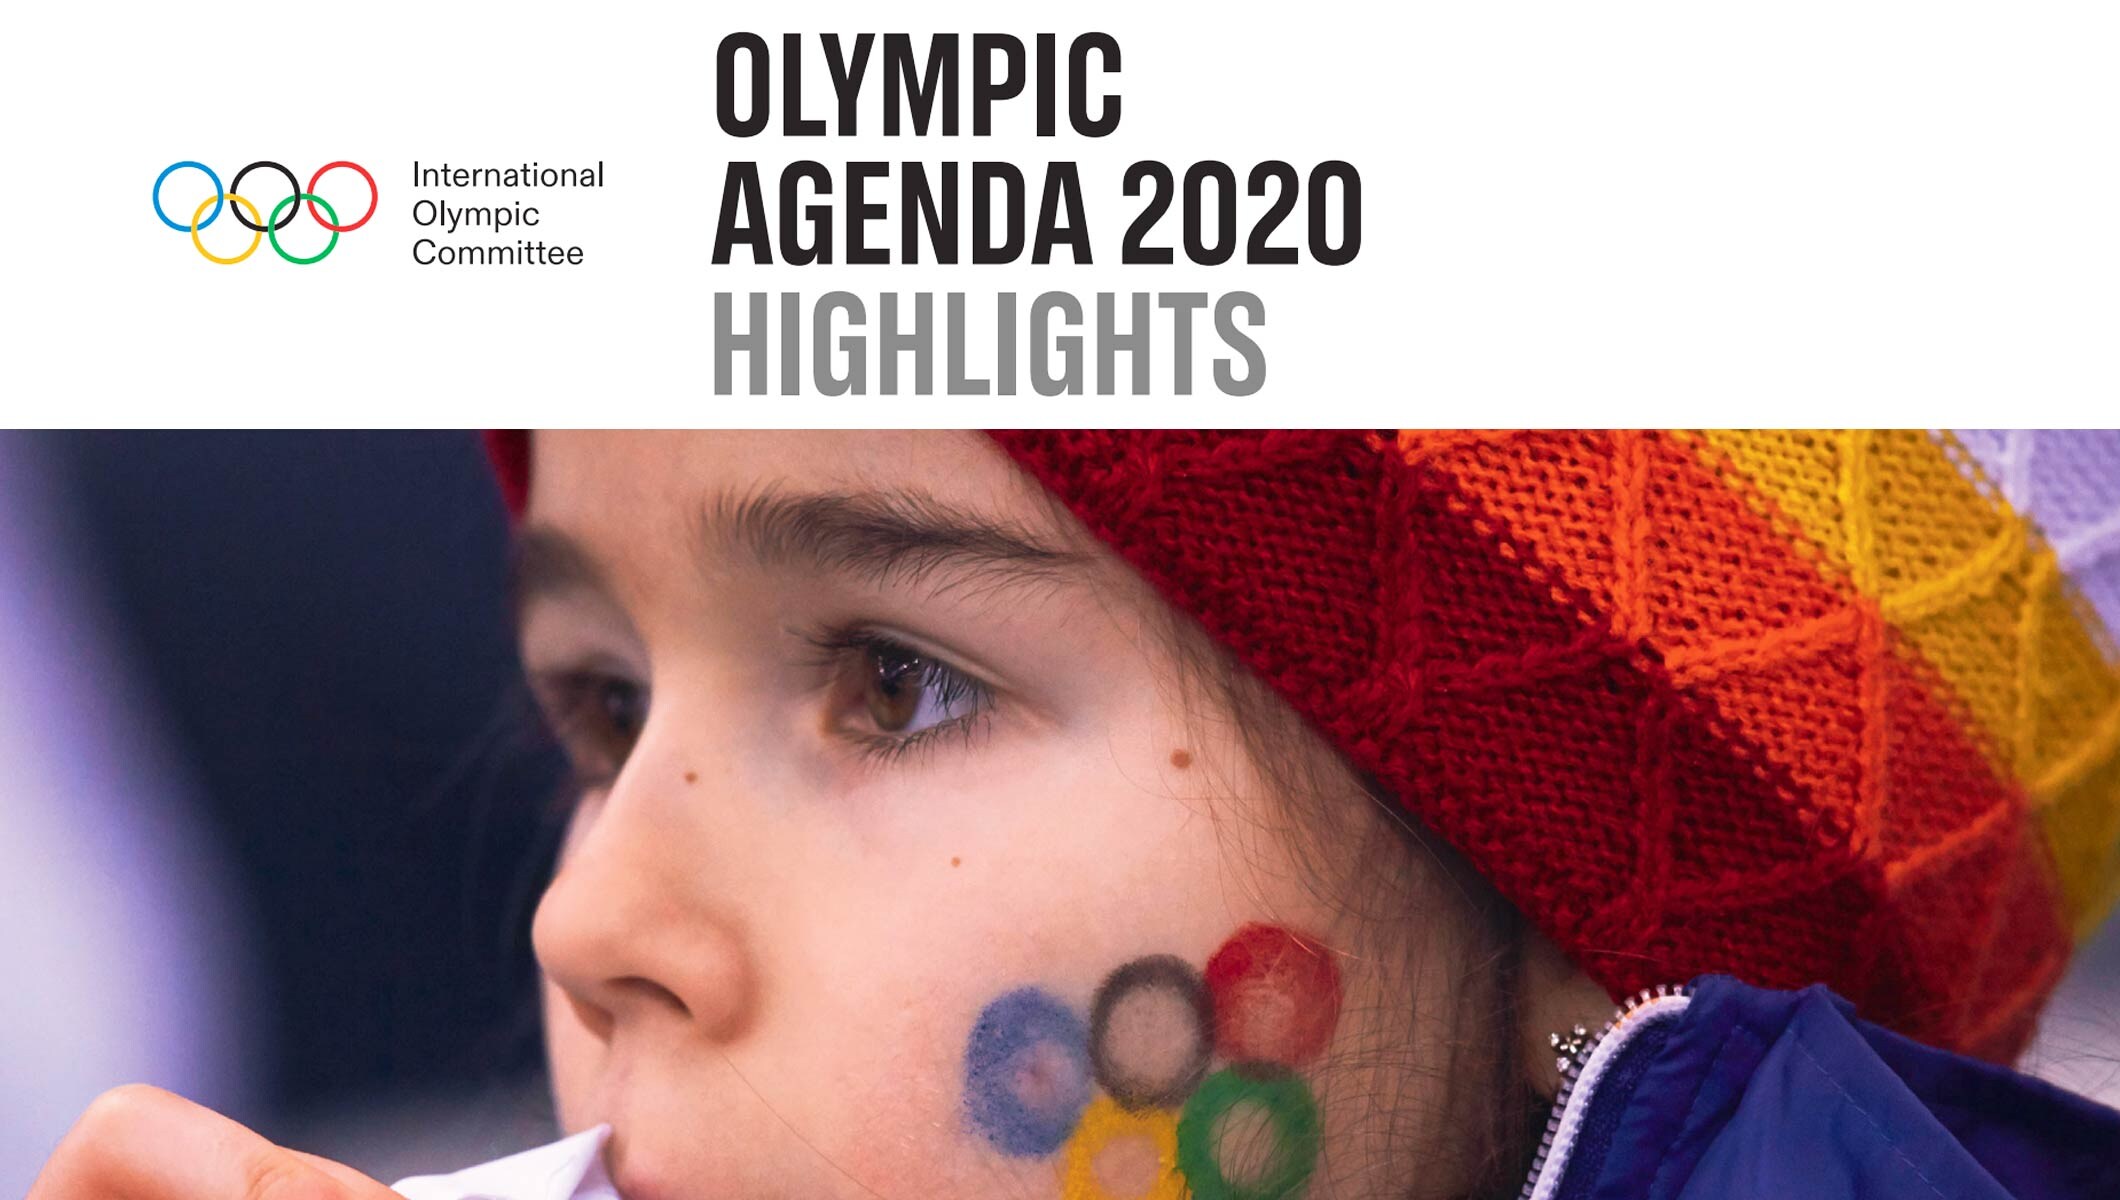 Senaat Expliciet Negen IOC Session praises achievements of Olympic Agenda 2020 and unanimously  approves closing report - Olympic News